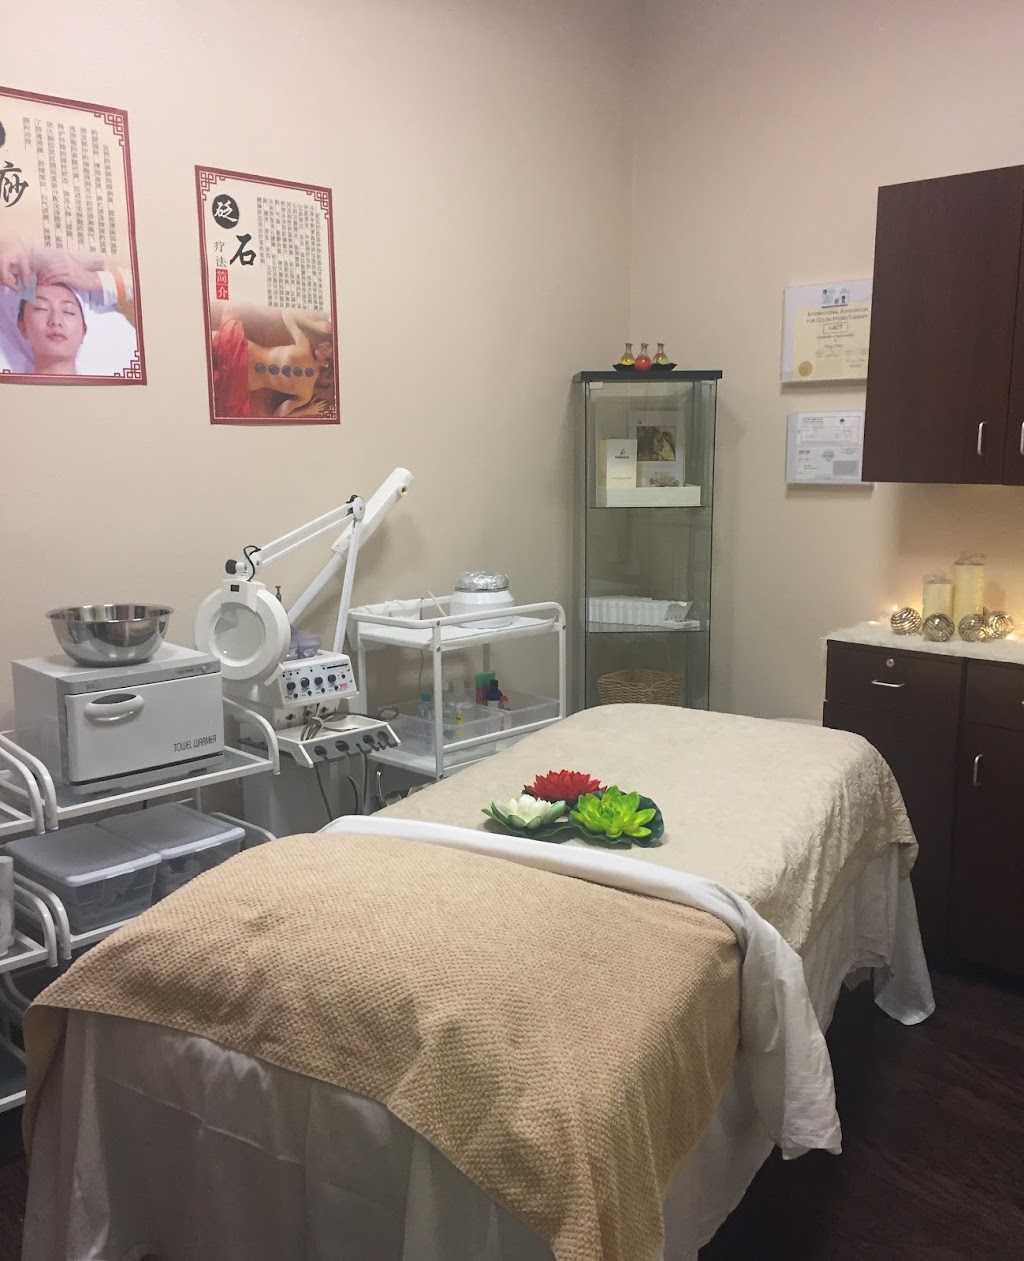 Colon Hydrotherapy Lymphatic Drainage-Zen Wellness By Cecily | Inside Phenix Salon Suite 4200, Chino Hills Pkwy Suite 650 Room 110, Chino Hills, CA 91709, USA | Phone: (951) 552-0167